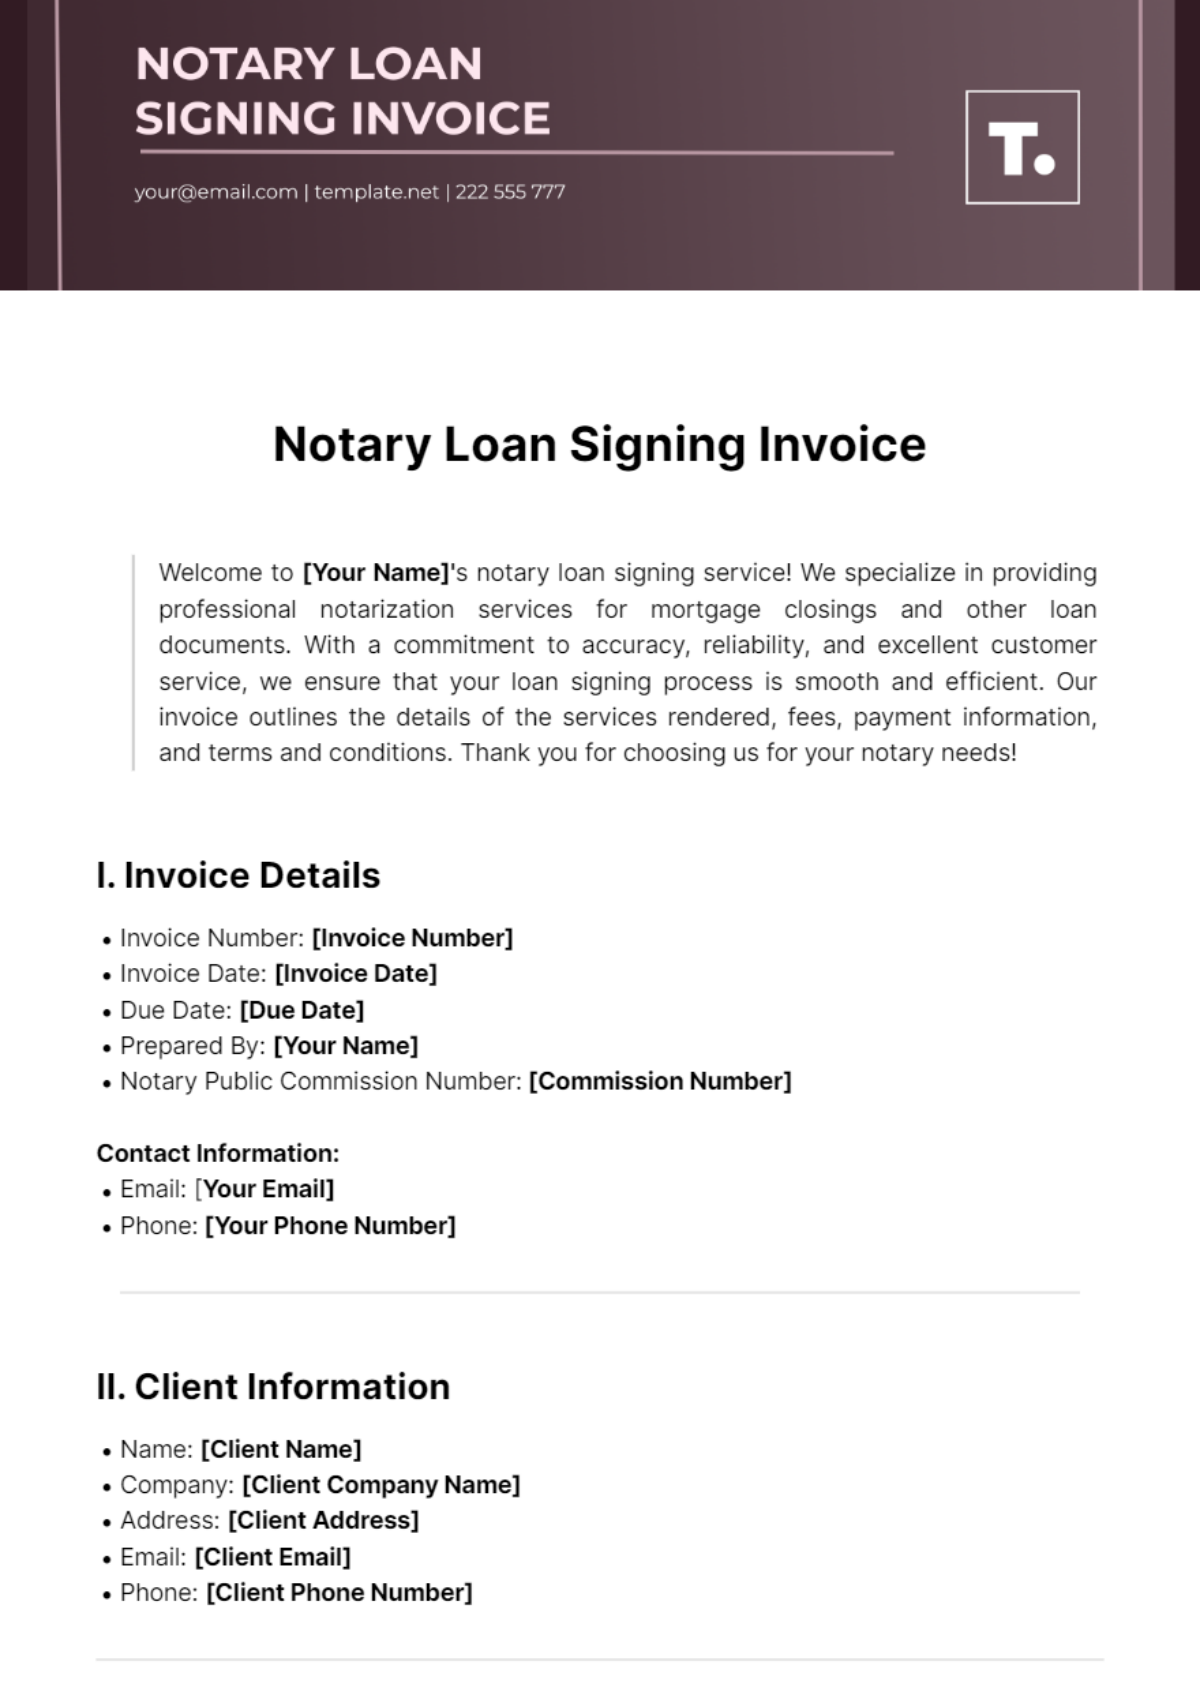 Notary Loan Signing Invoice Template